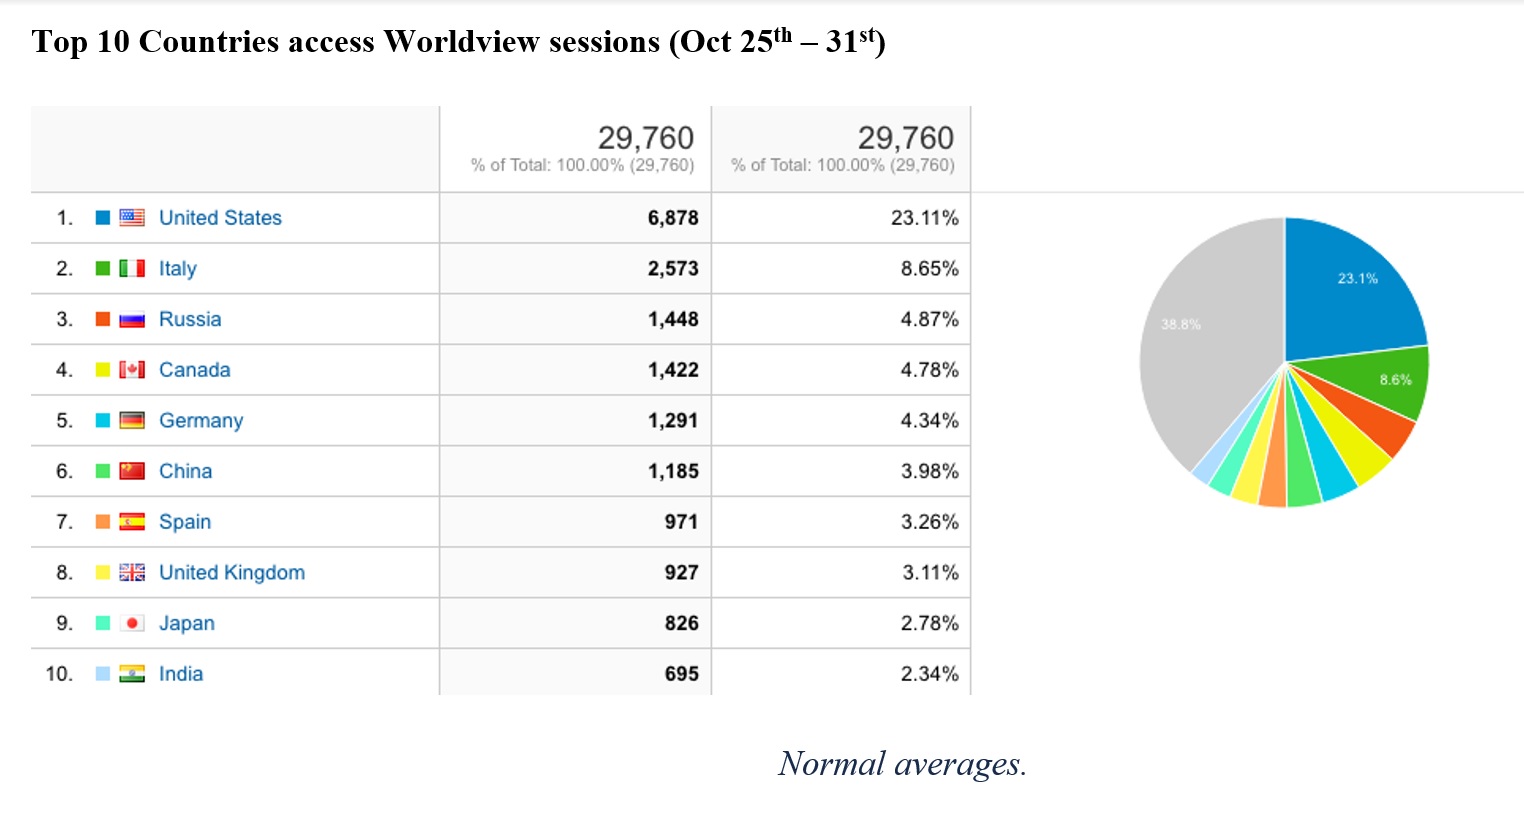 Top 10 countries accessing Worldview sessions (October 25-31)